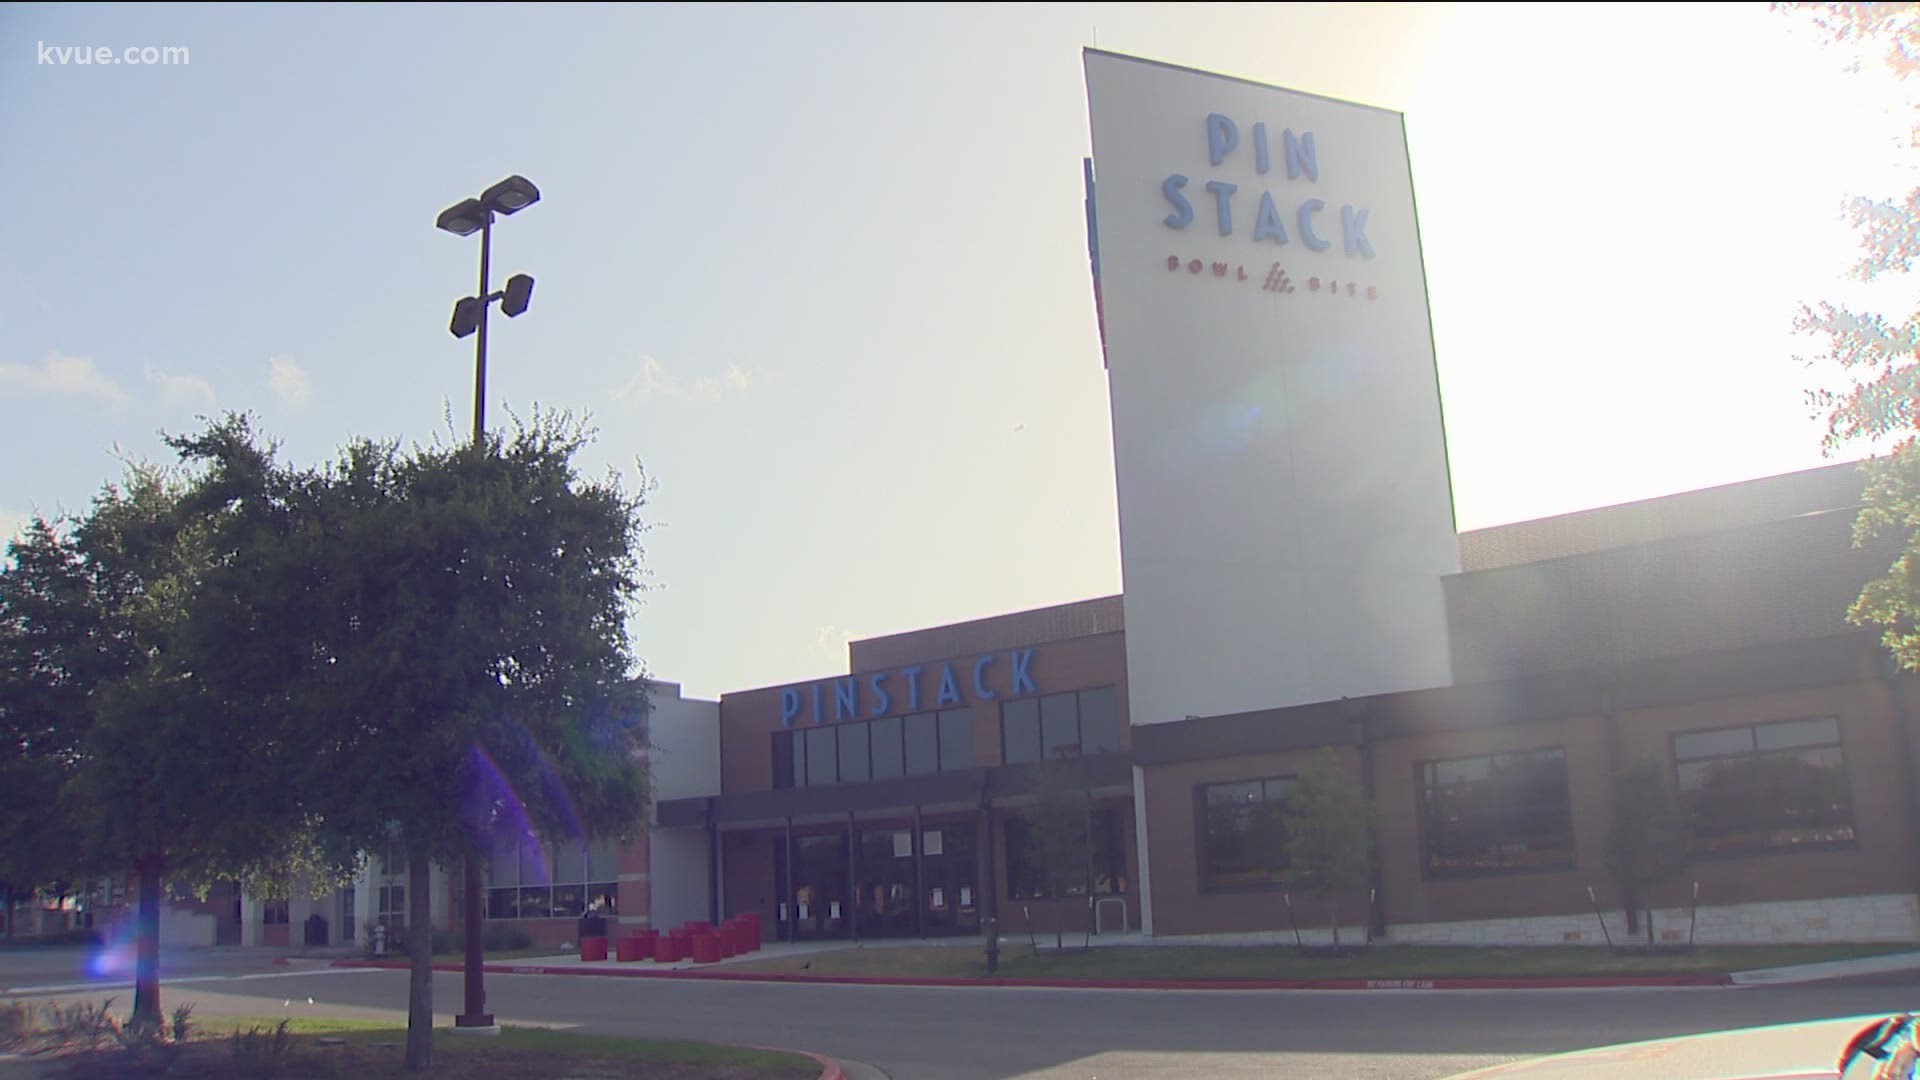 Early Sunday morning, Austin 911 received multiple calls of shots fired in the parking lot of Pinstack, a bowling alley located at 500 West Canyon Ridge Drive.